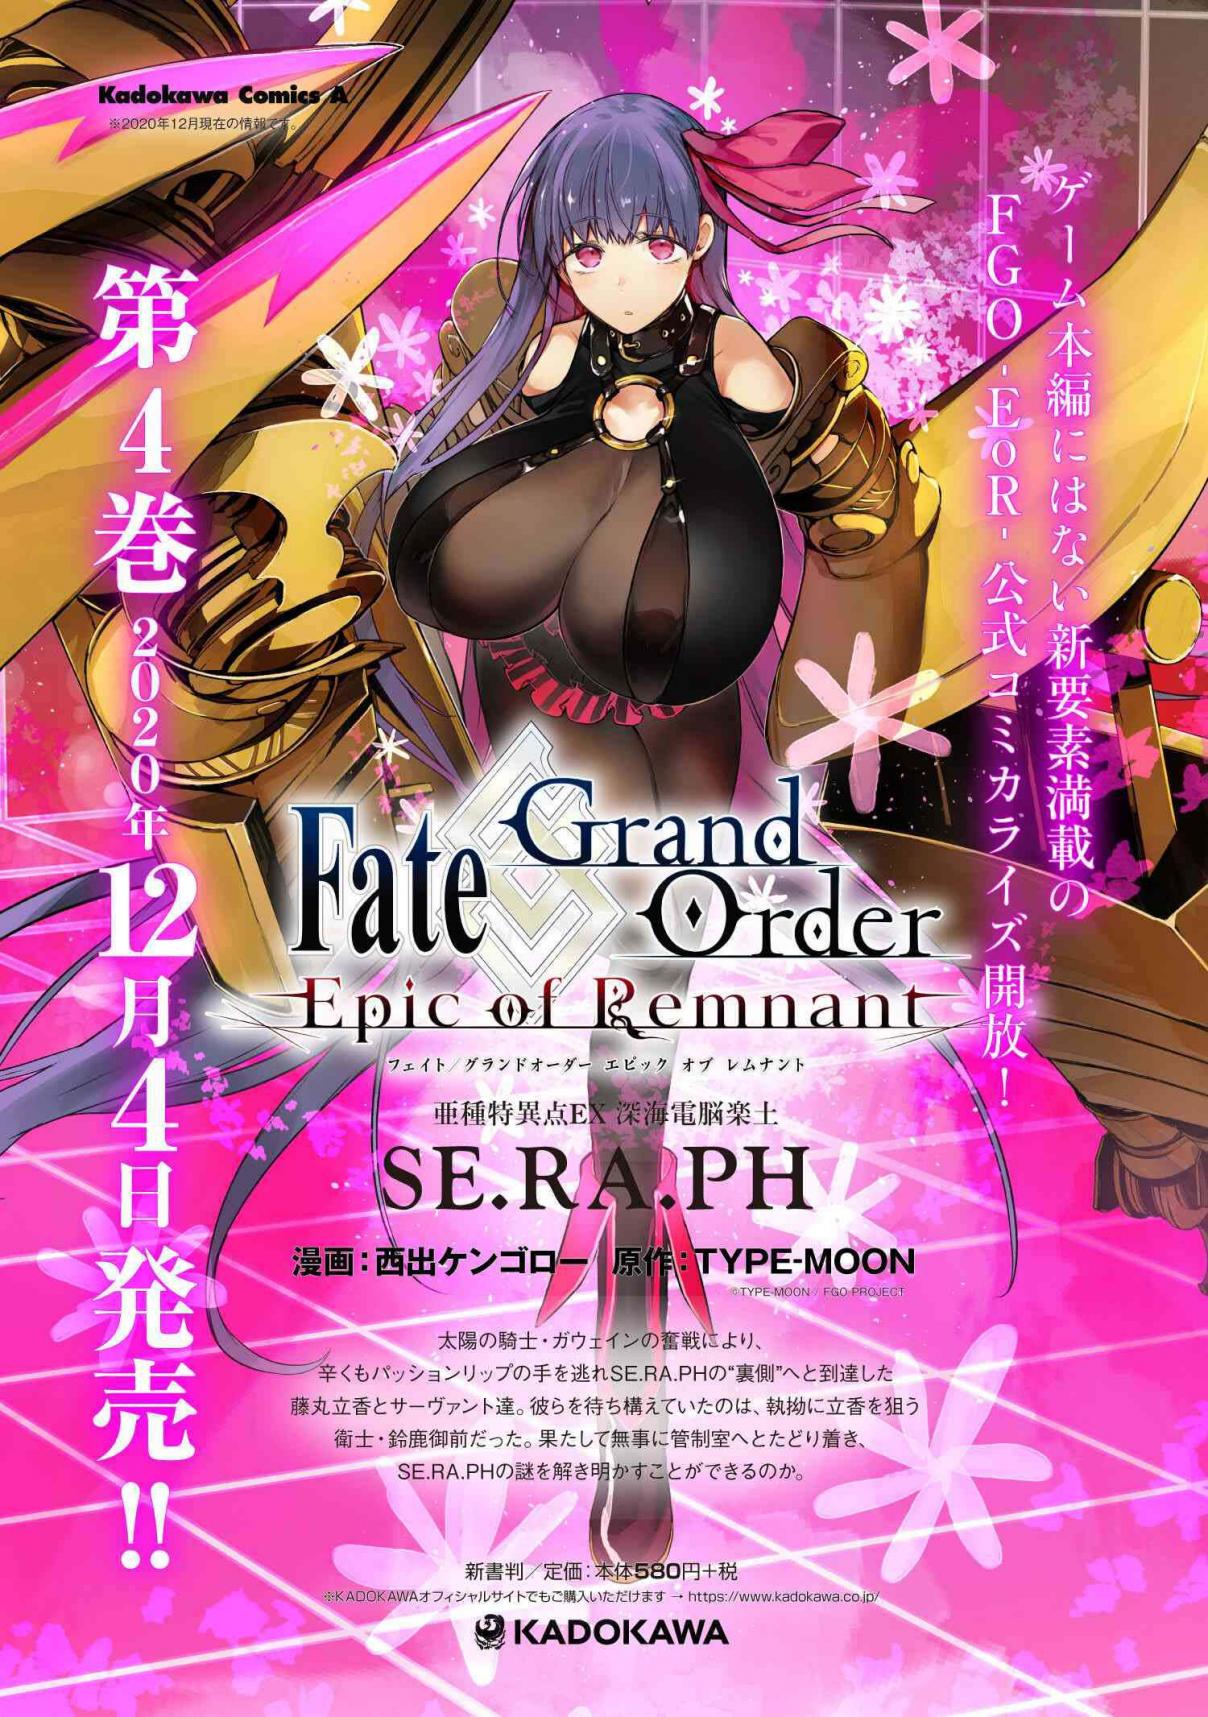 Fate/Grand Order -Epic of Remnant- Deep Sea Cyber-Paradise, SE.RA.PH 22.2